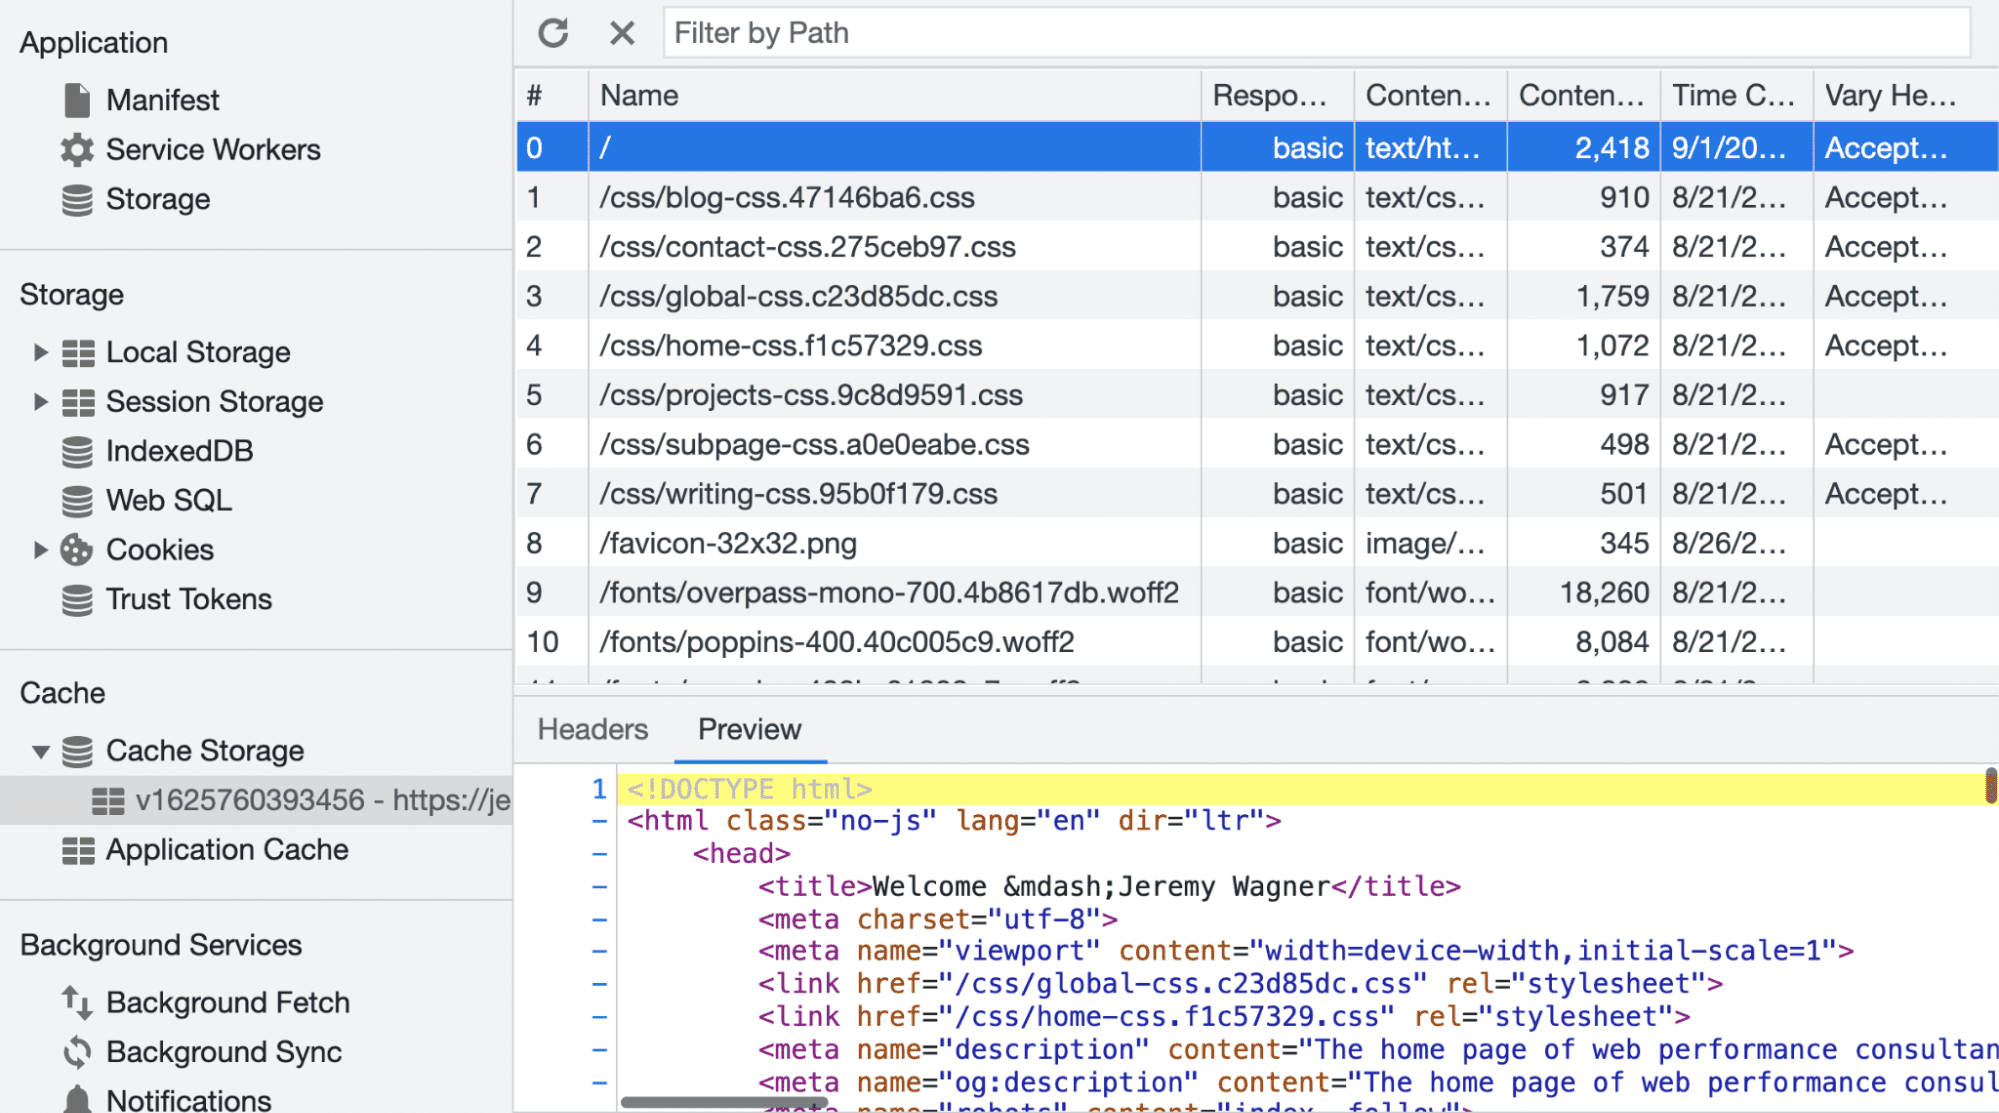 Inspecting the cache in DevTools